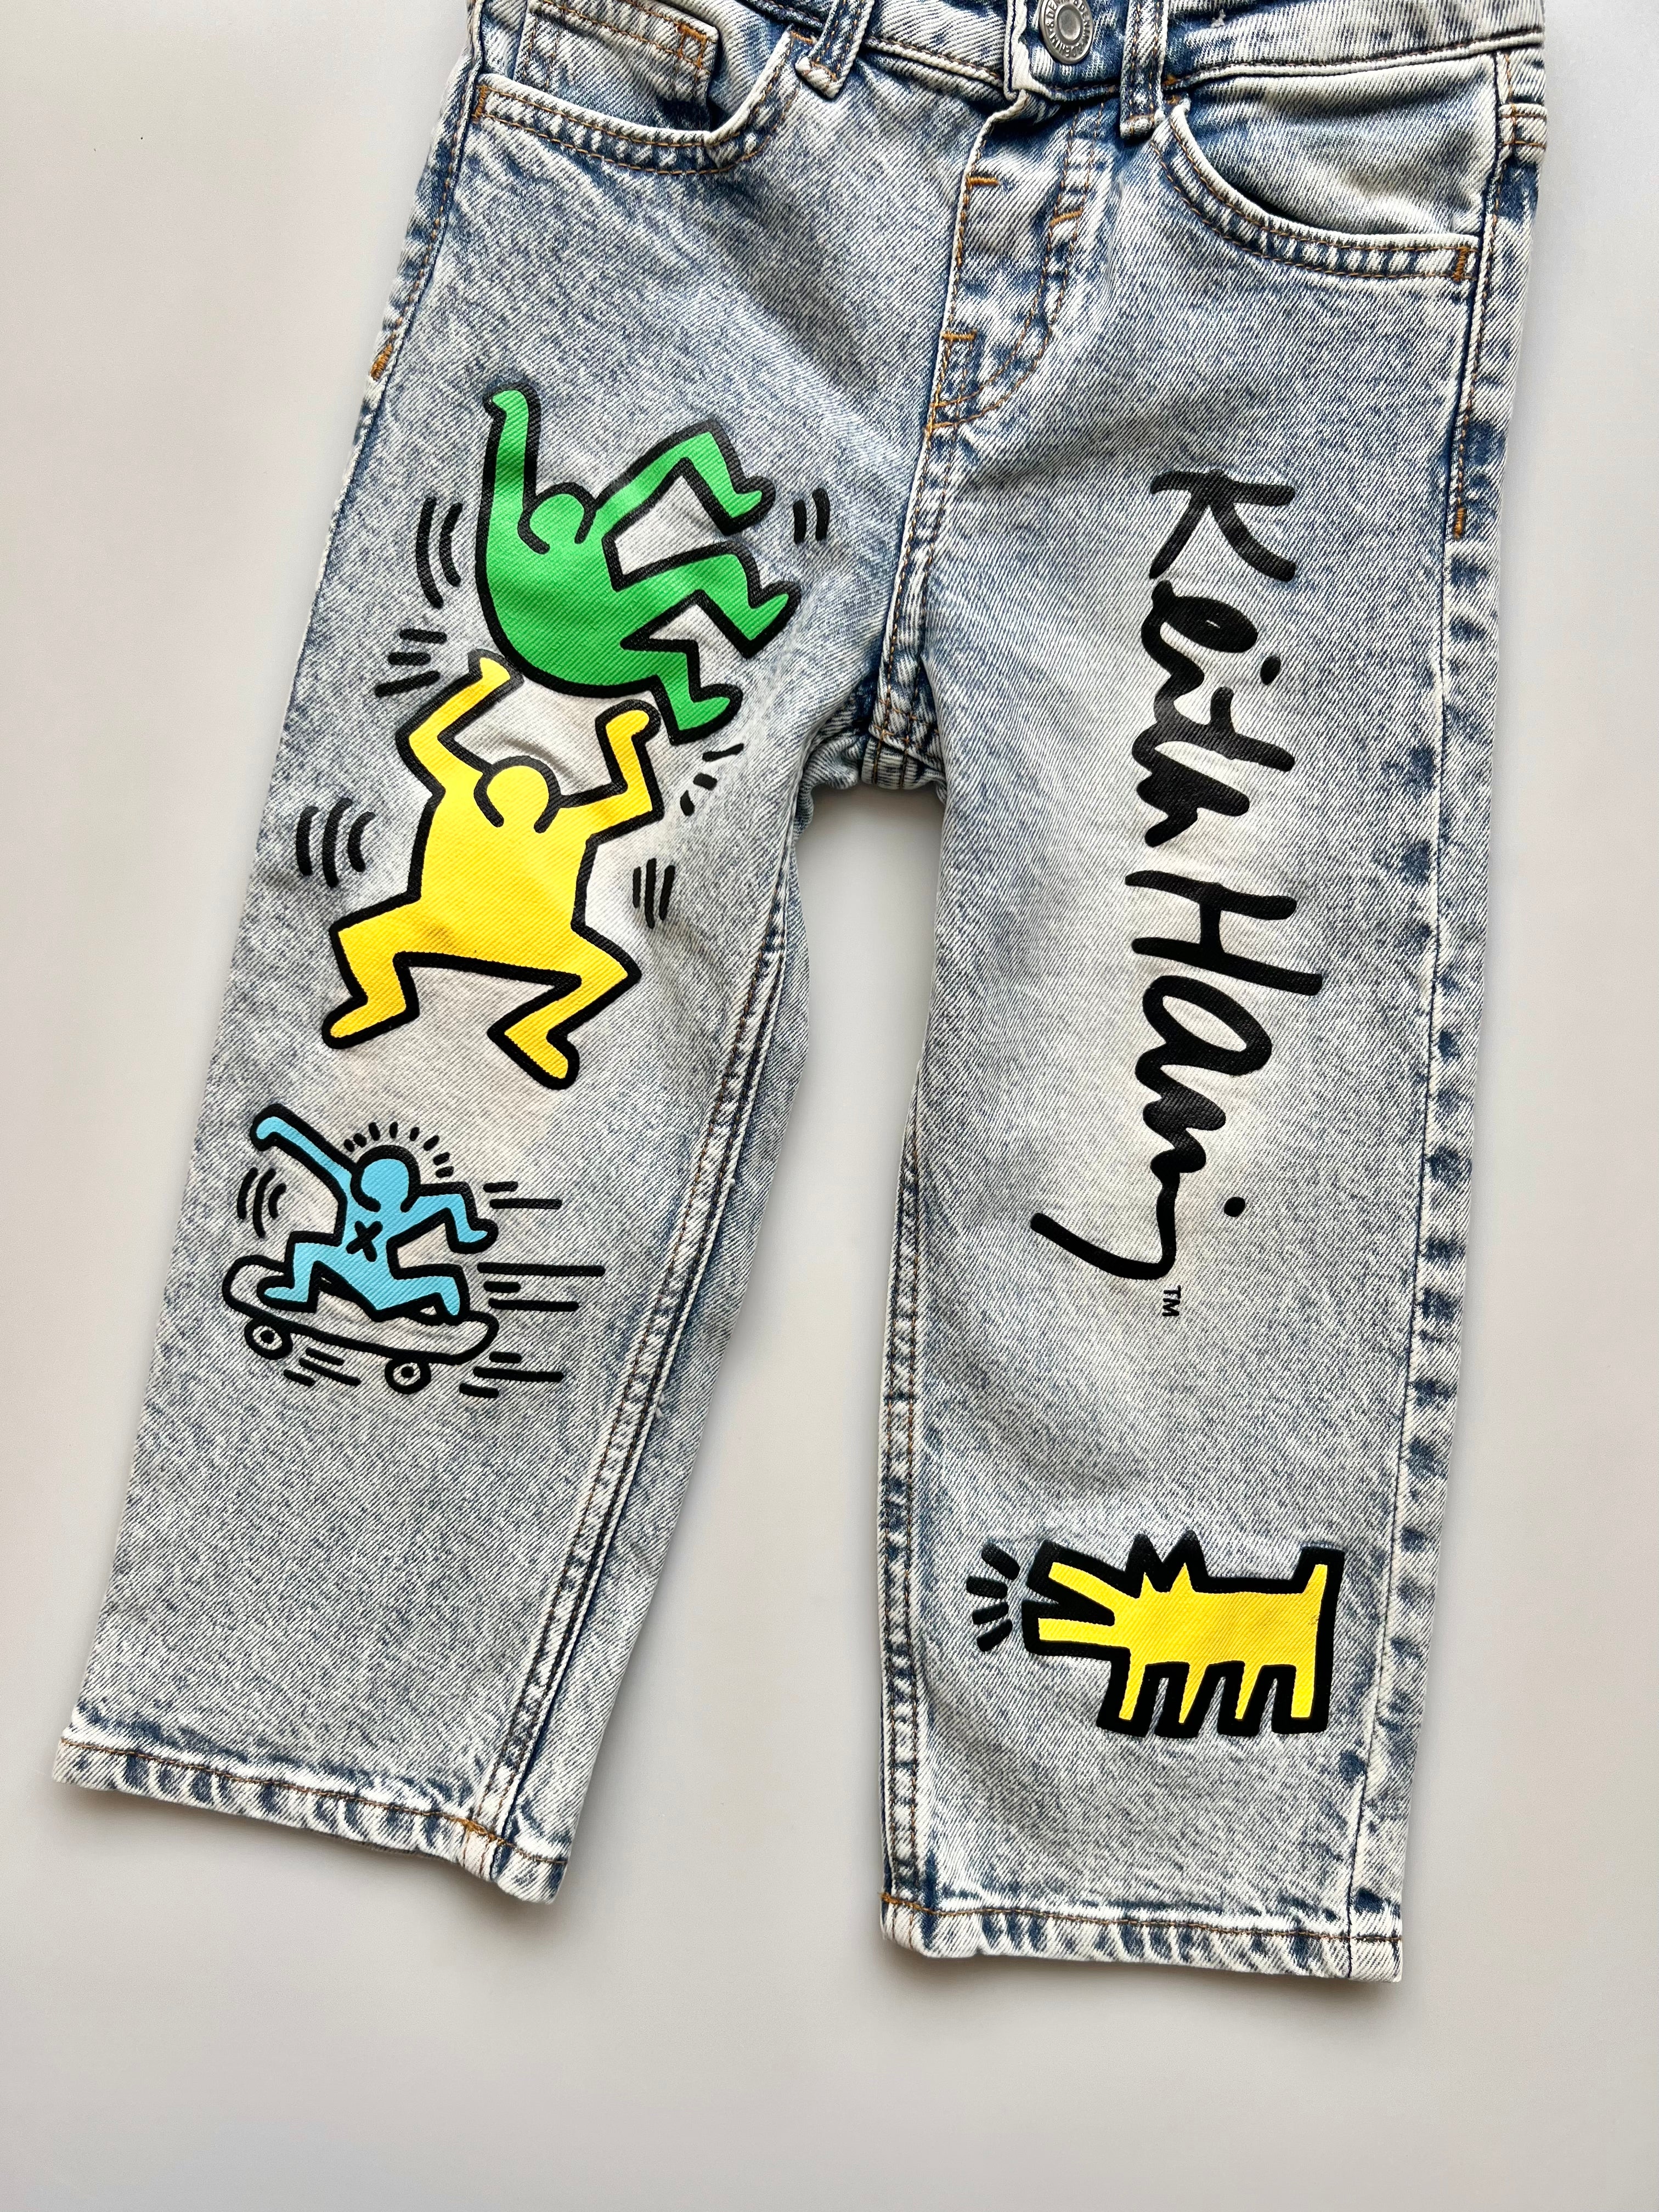 Keith Haring x HM Jeans Age 2